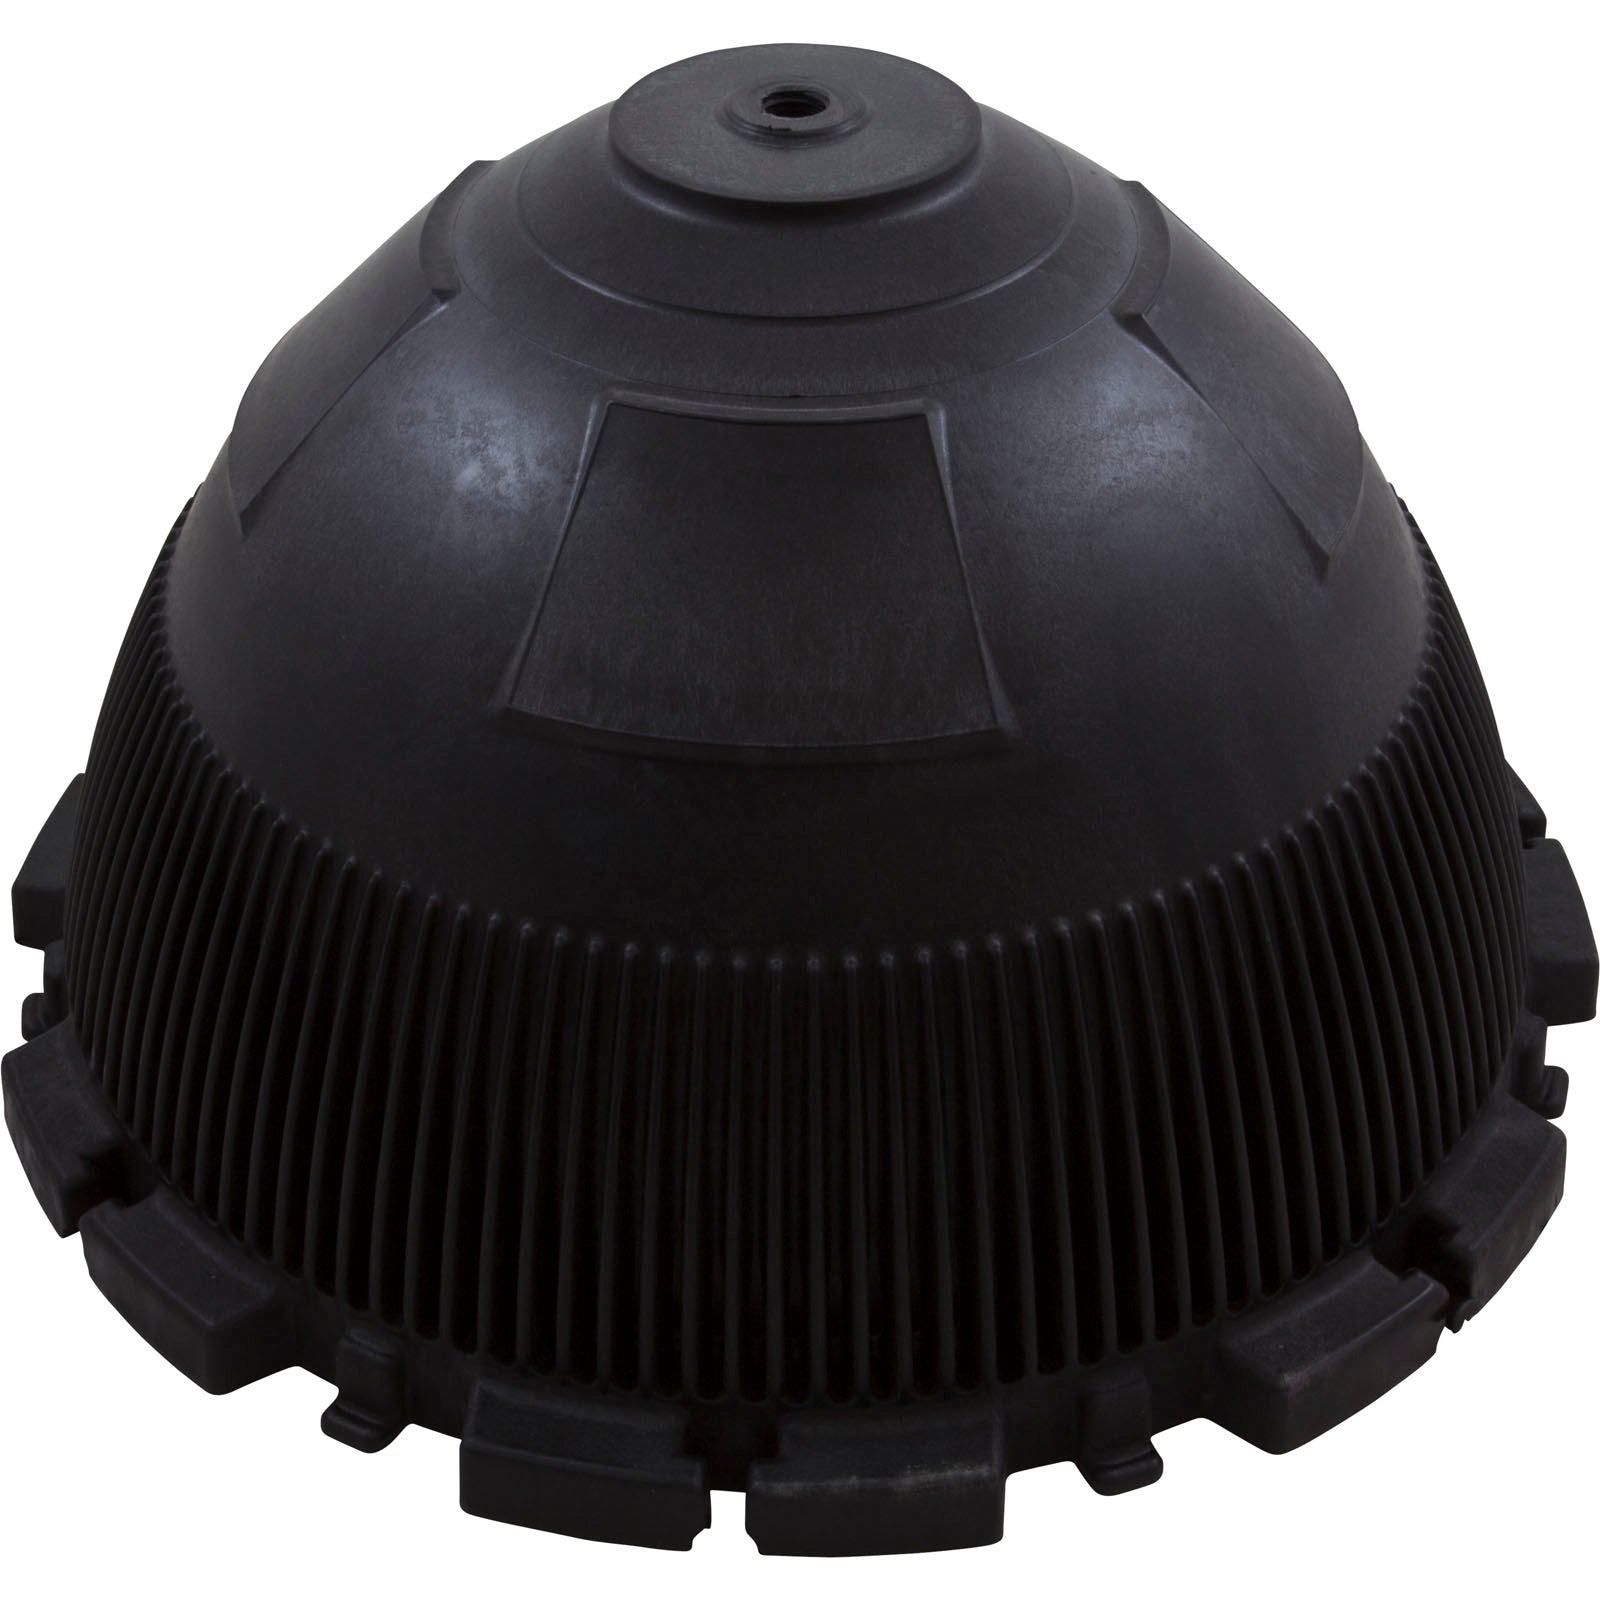 Tank Lid, Pentair Sta-Rite System 3, All S7 Models, 21"/ 248519000